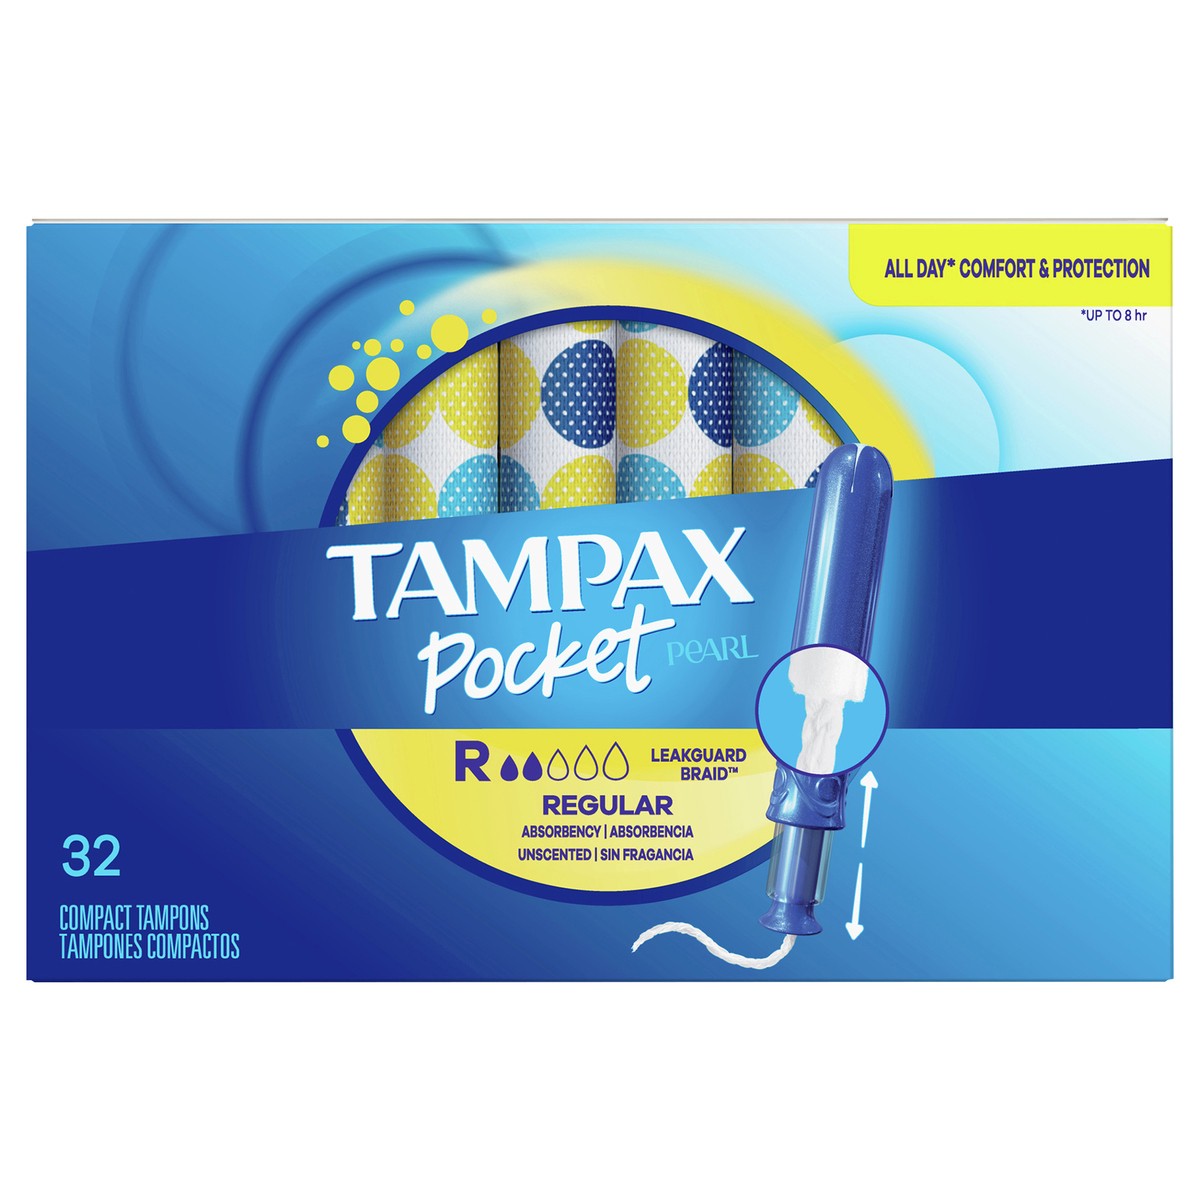 slide 1 of 8, Tampax Pocket Pearl Compact Tampons Regular Absorbency with BPA-Free Plastic Applicator and LeakGuard Braid, Unscented, 32 Count, 32 ct